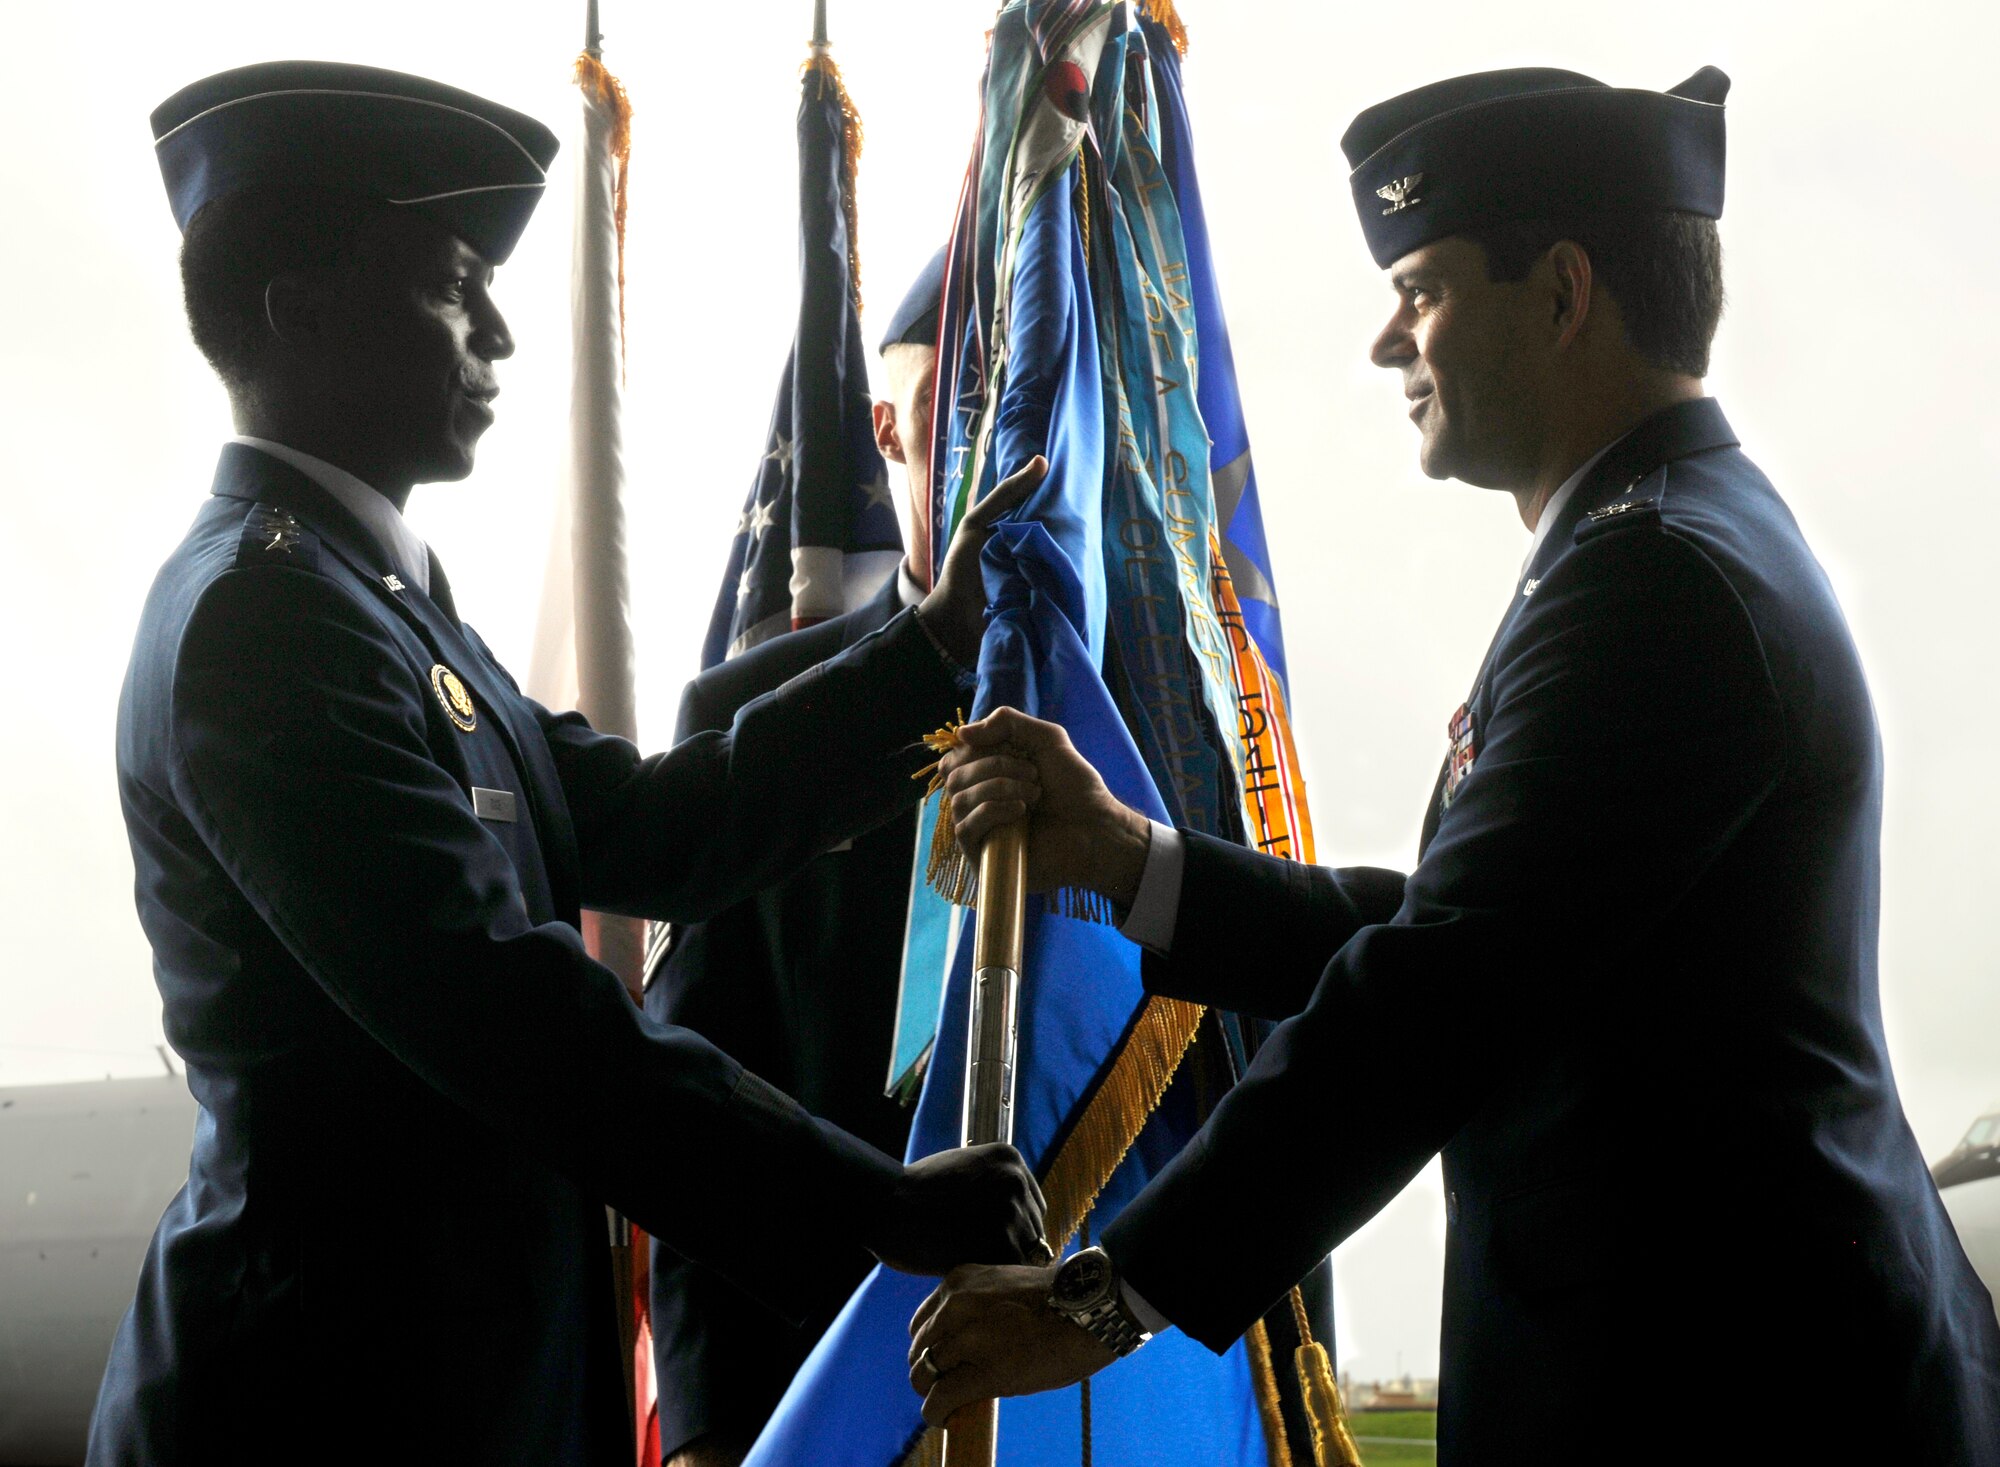 Col. Kenneth S. Wilsbach assumes command of the 18th Wing during a change of command July 9 at Kadena Air Base, Japan. Brig. Gen. Brett Williams relinquished command earlier during the ceremony.
(U.S. Air Force photo/Airman 1st Class Chad Warren)        